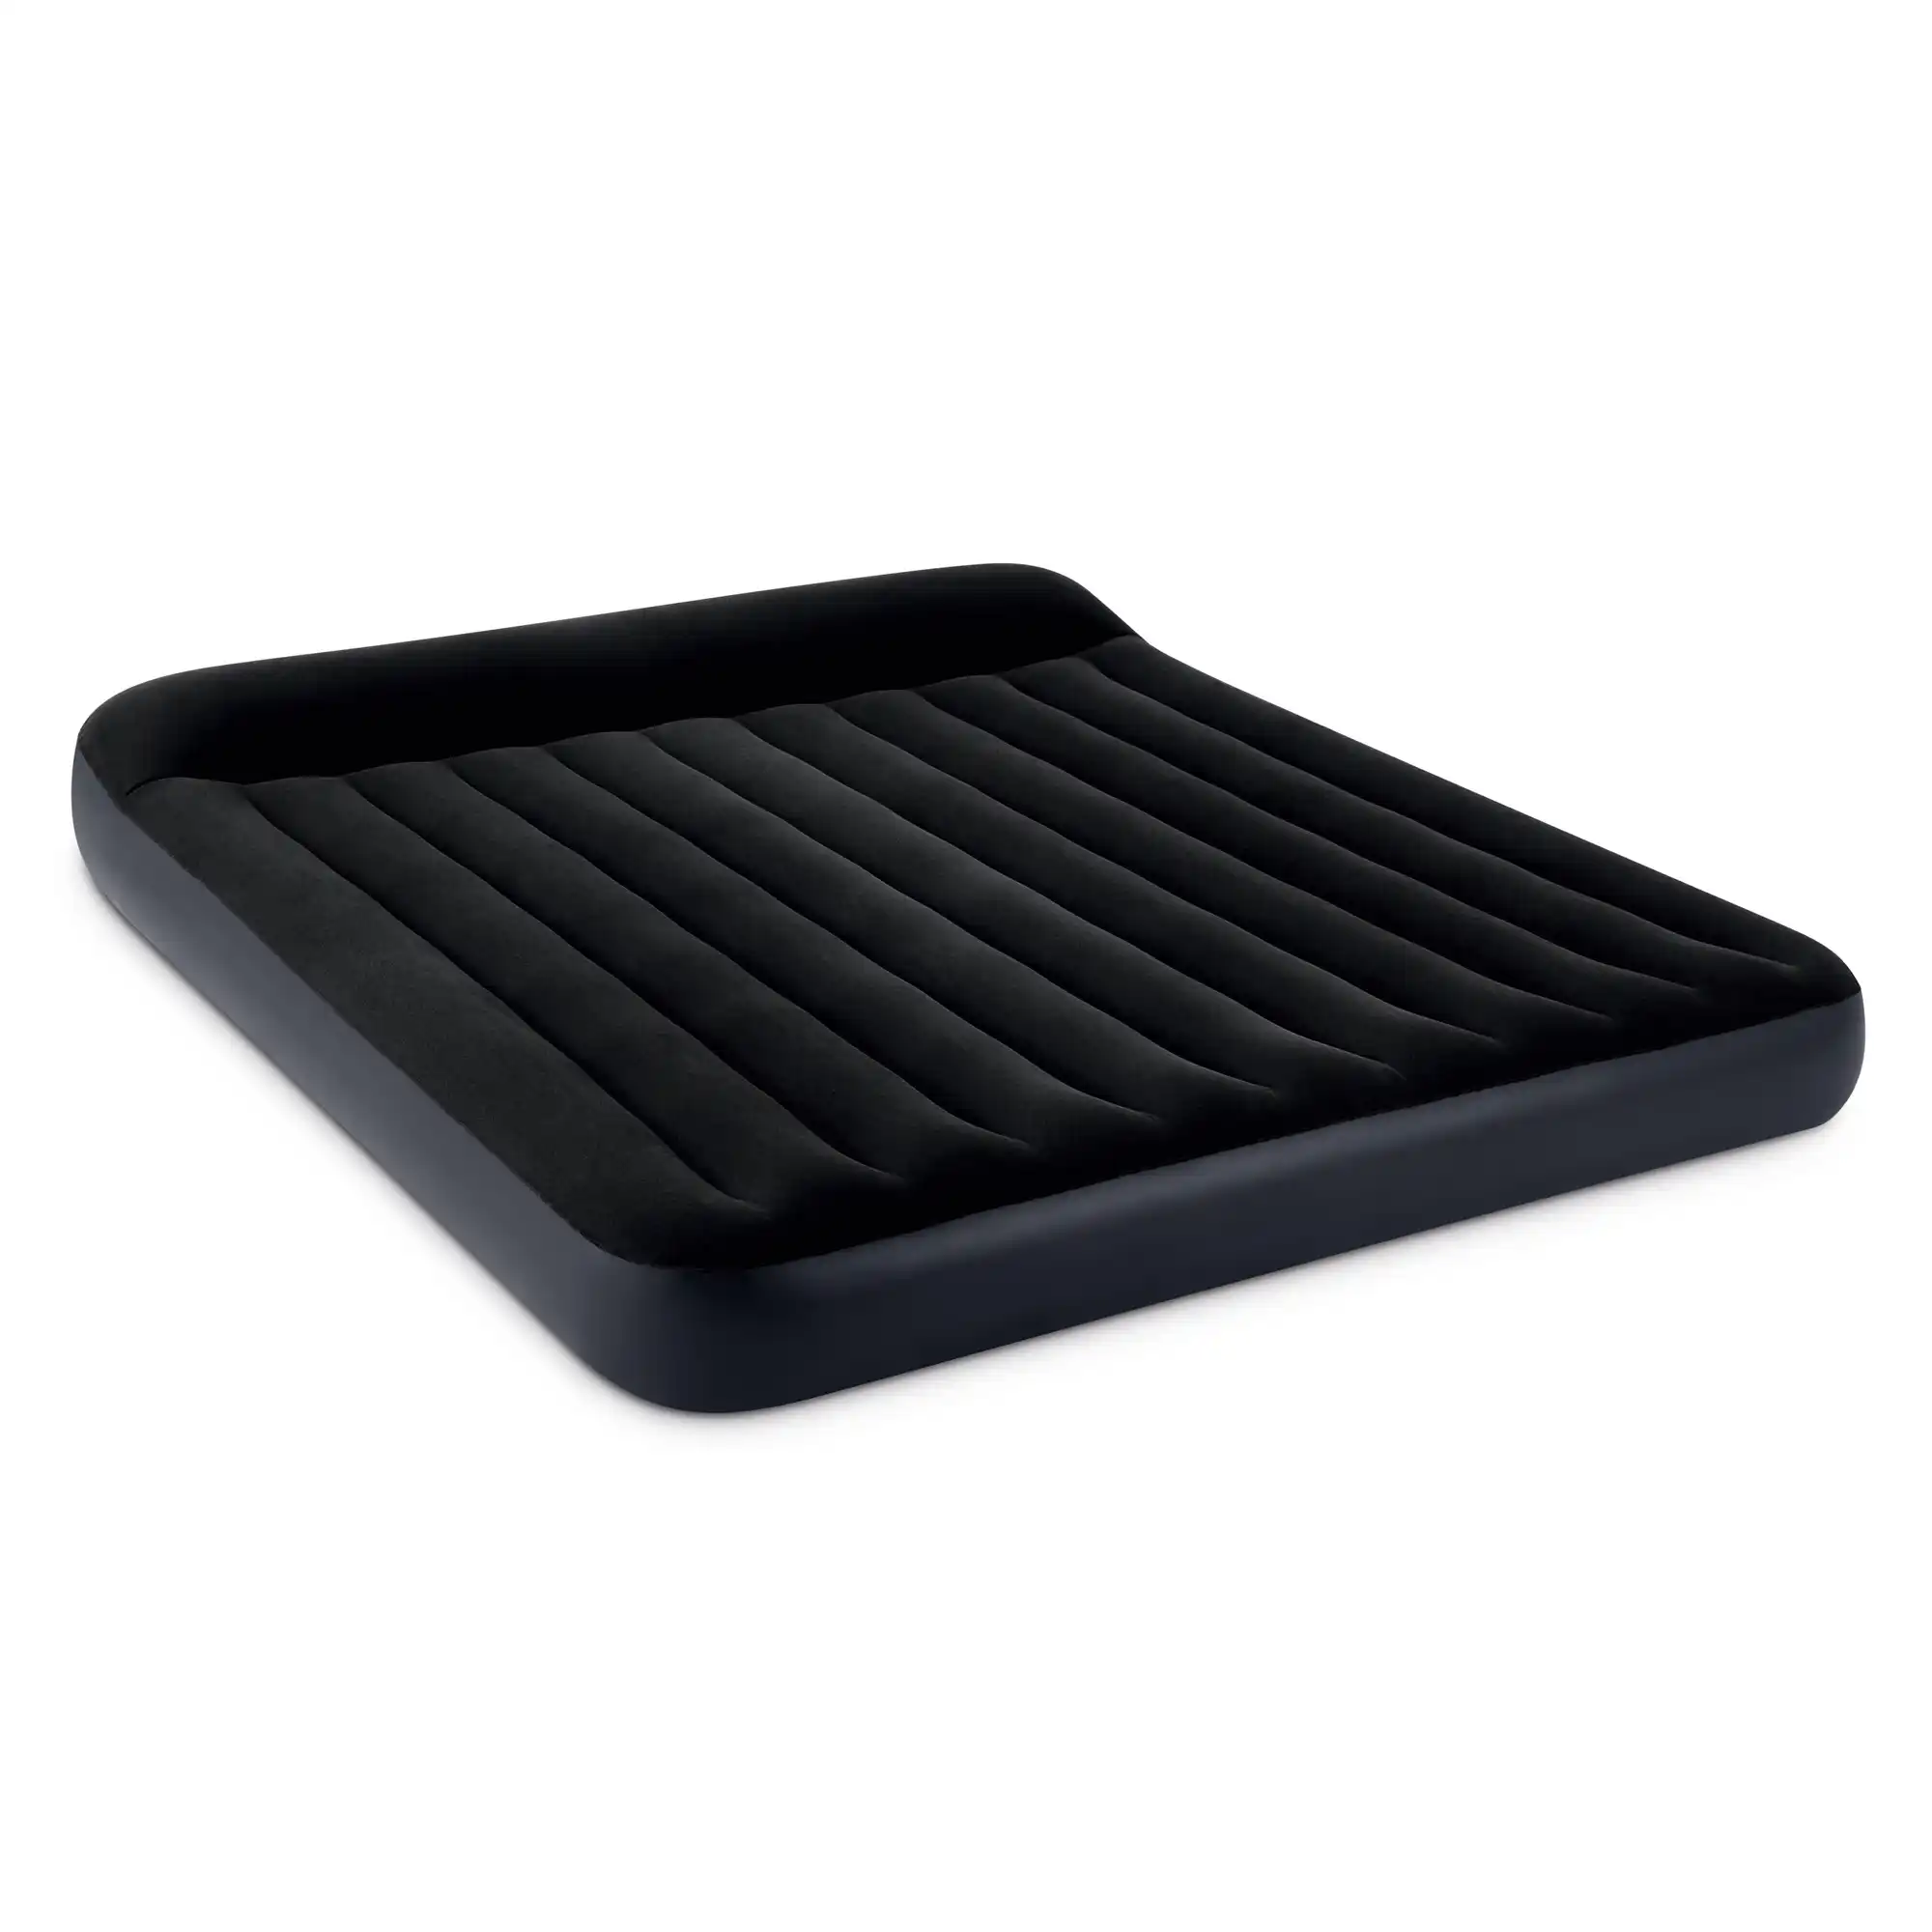 King Dura-Beam Pillow Rest Classic Airbed